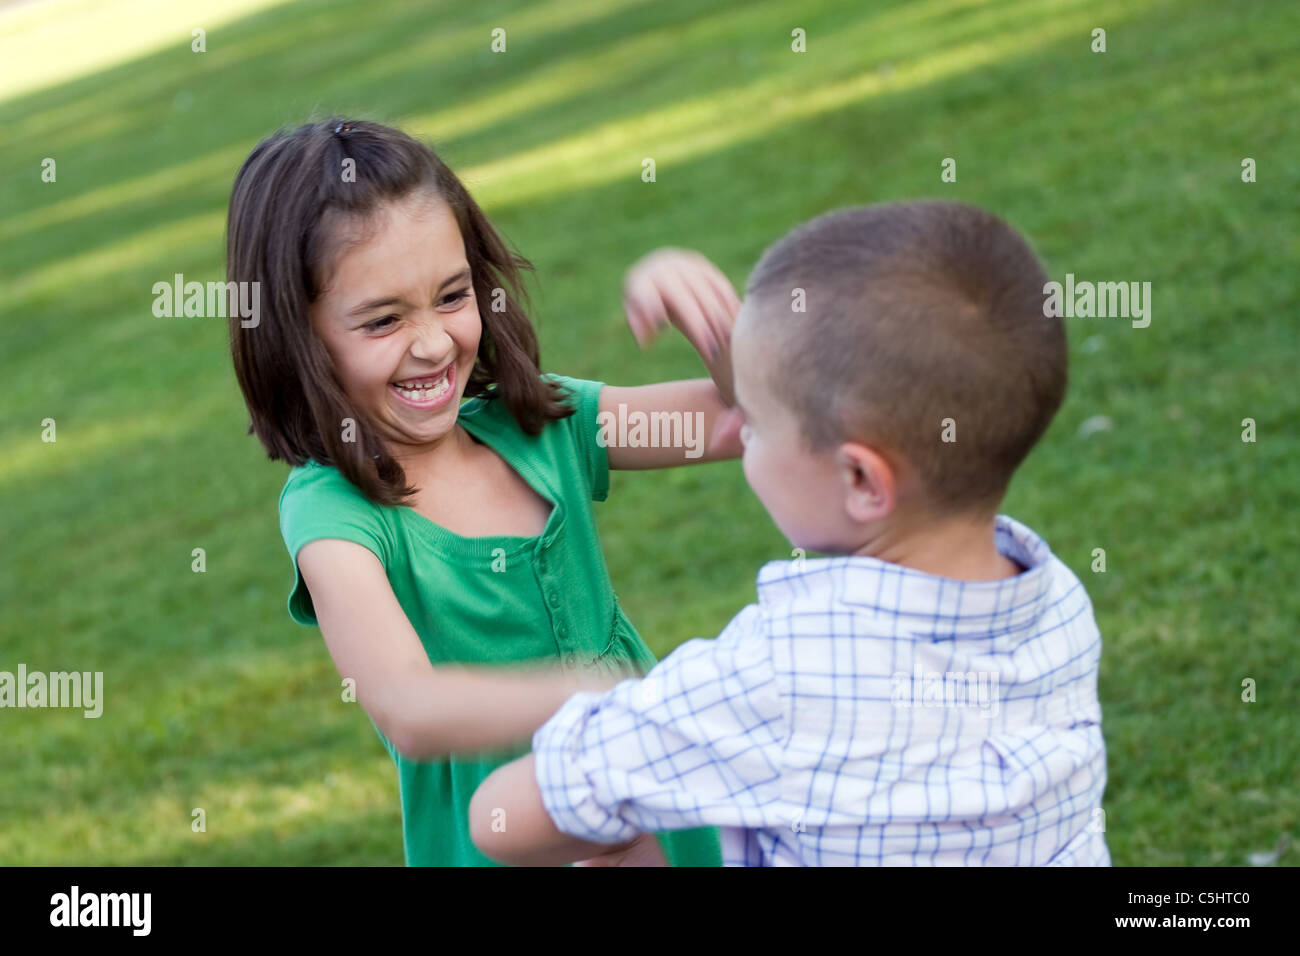 Two young sibling playfully hitting each other and rough housing. Slight motion blur with sharp focus on the girls face. Stock Photo